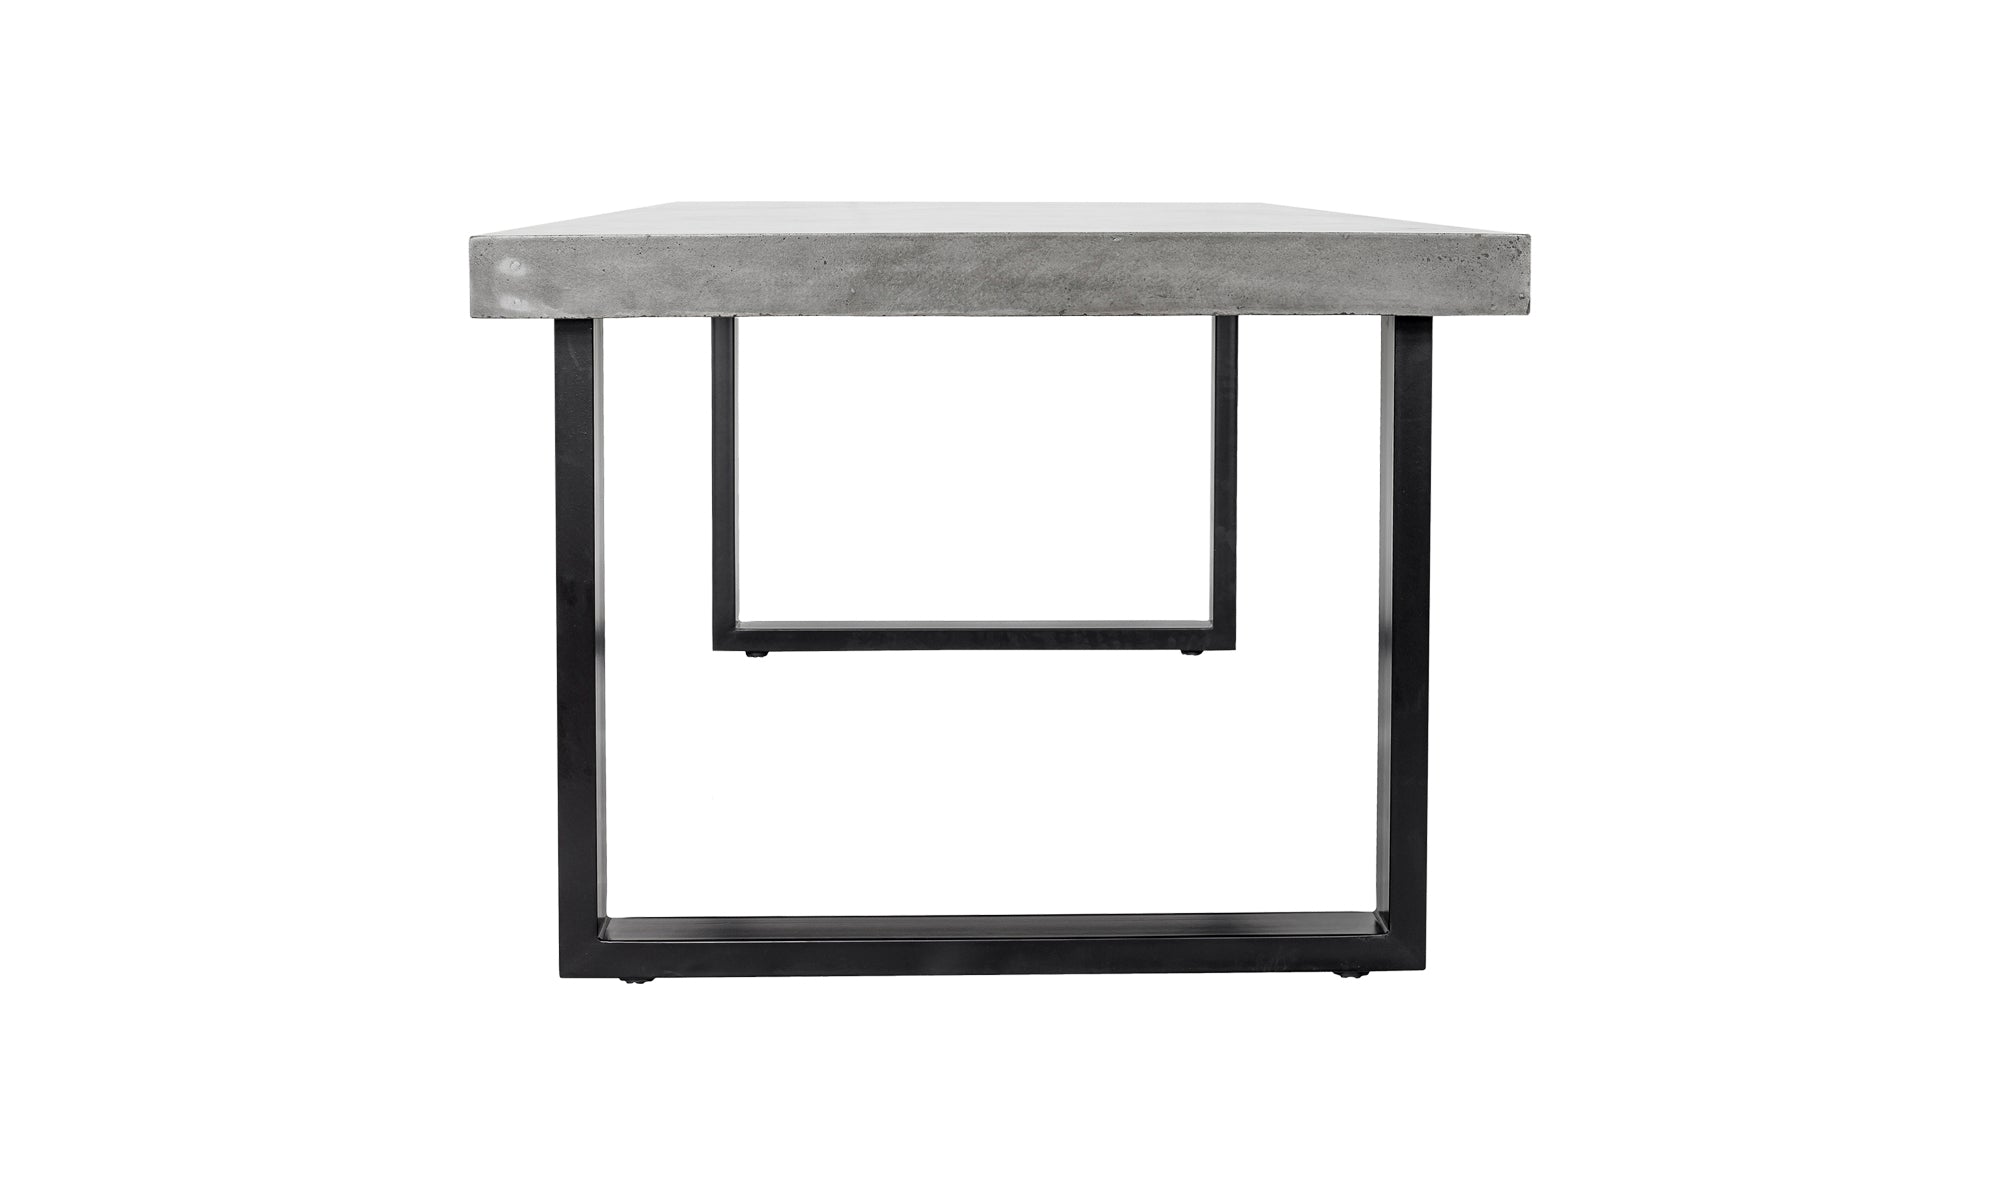 Jedrik Grey Outdoor Dining Table- Large